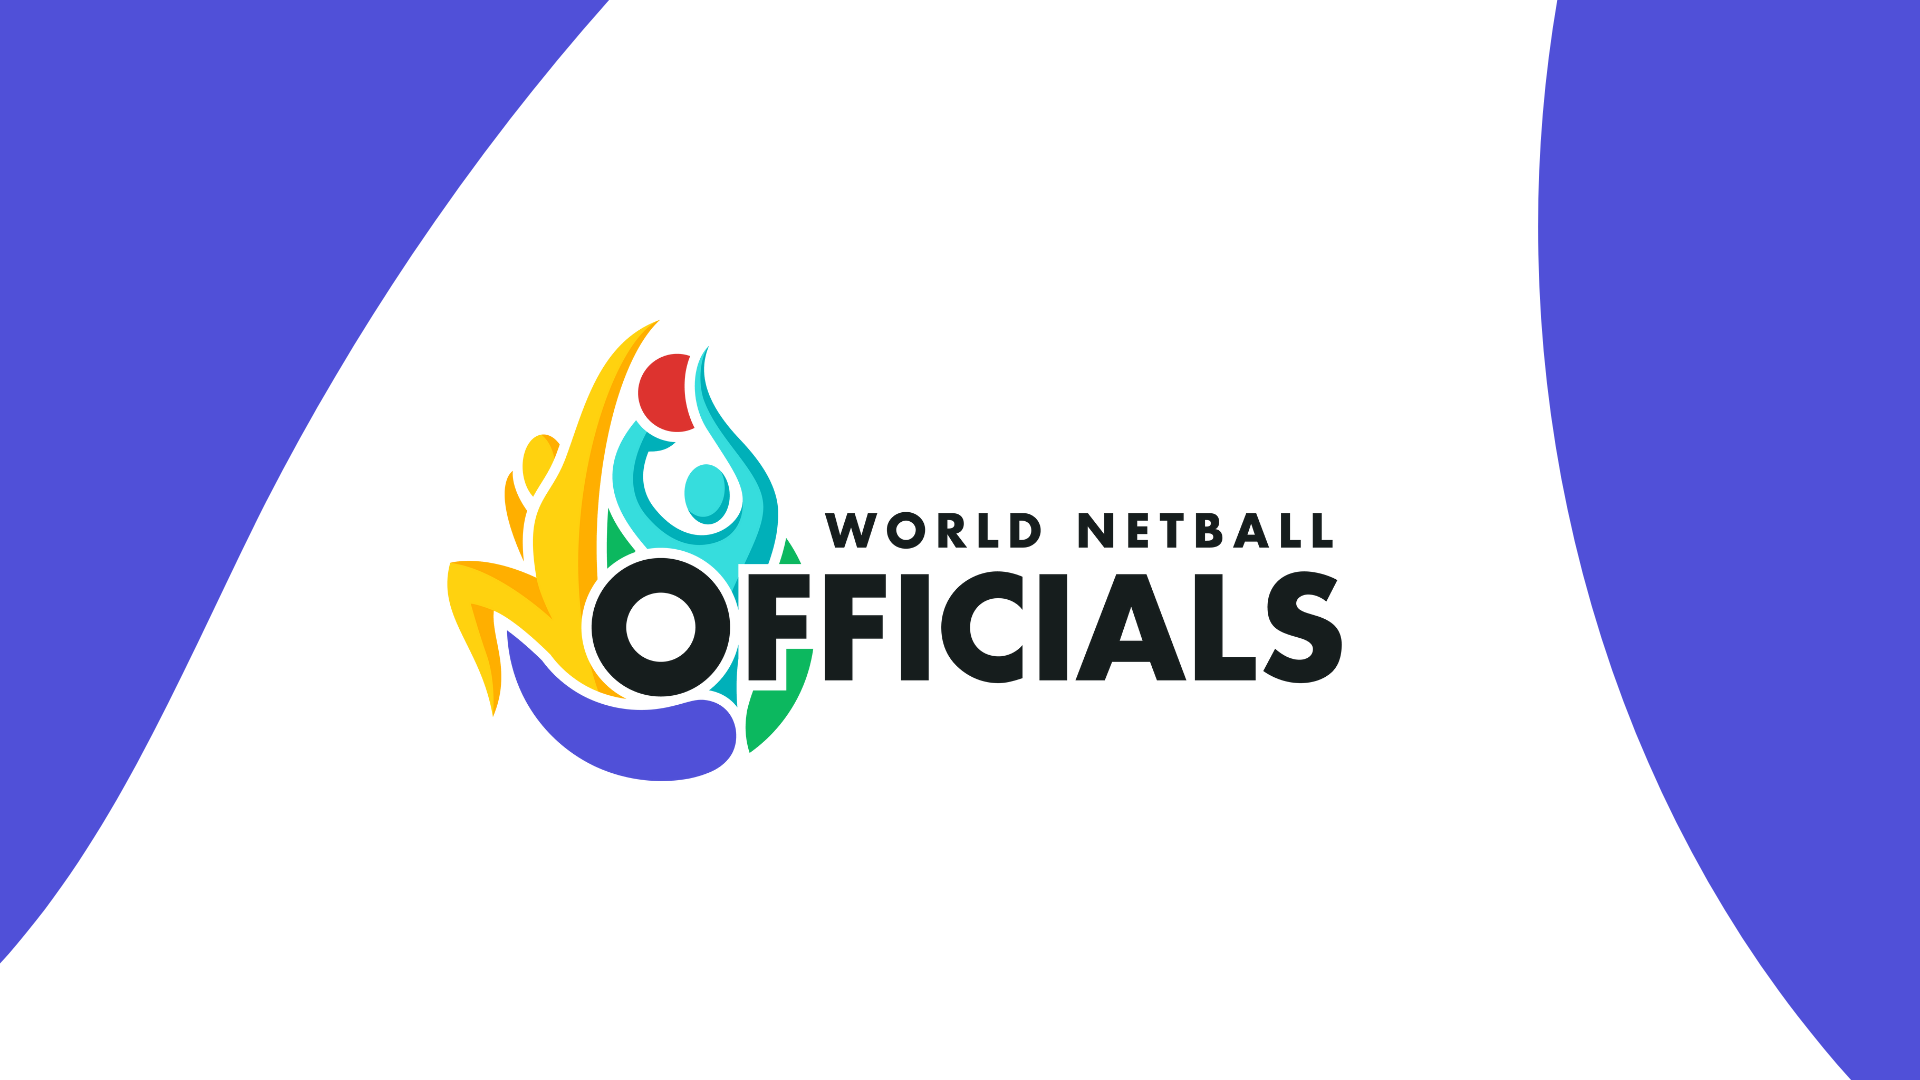 World Netball reveals team of "incredible voluntary officials" for Birmingham 2022